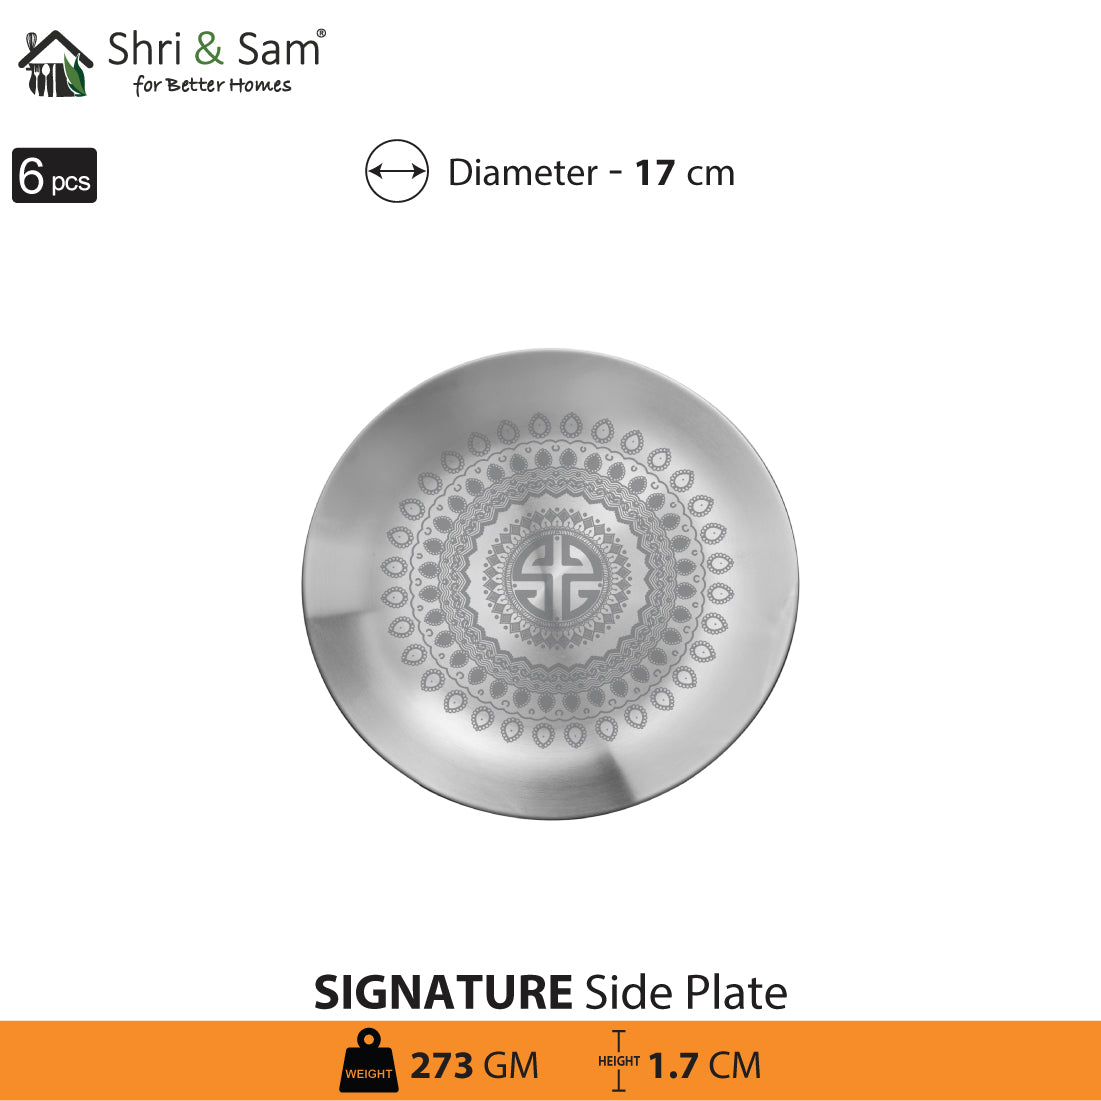 Stainless Steel 6 PCS Side Plate with Laser Signature - Matt